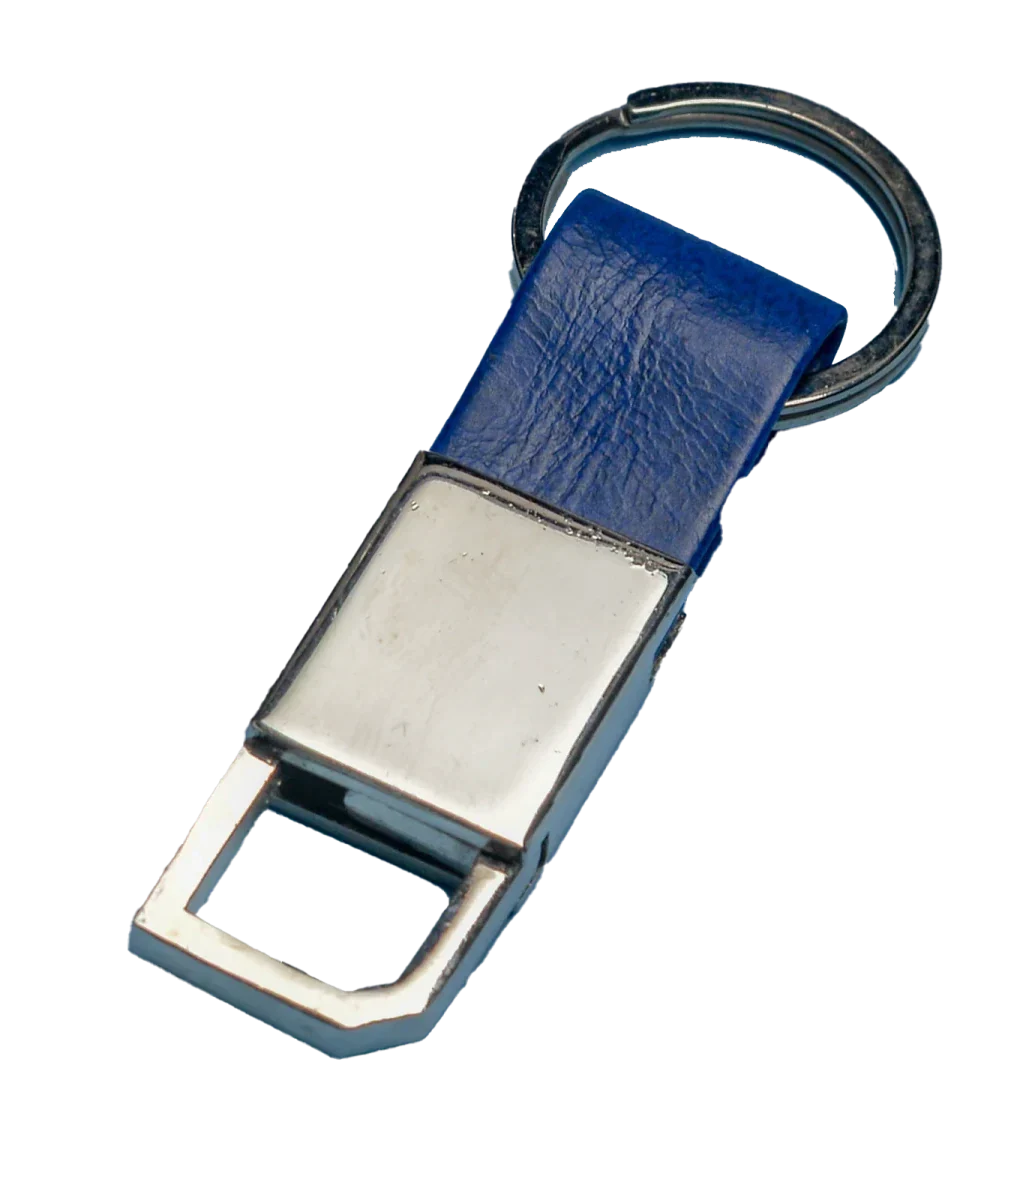 This elegant metal keychain is the perfect way to keep your keys organized and easily accessible.